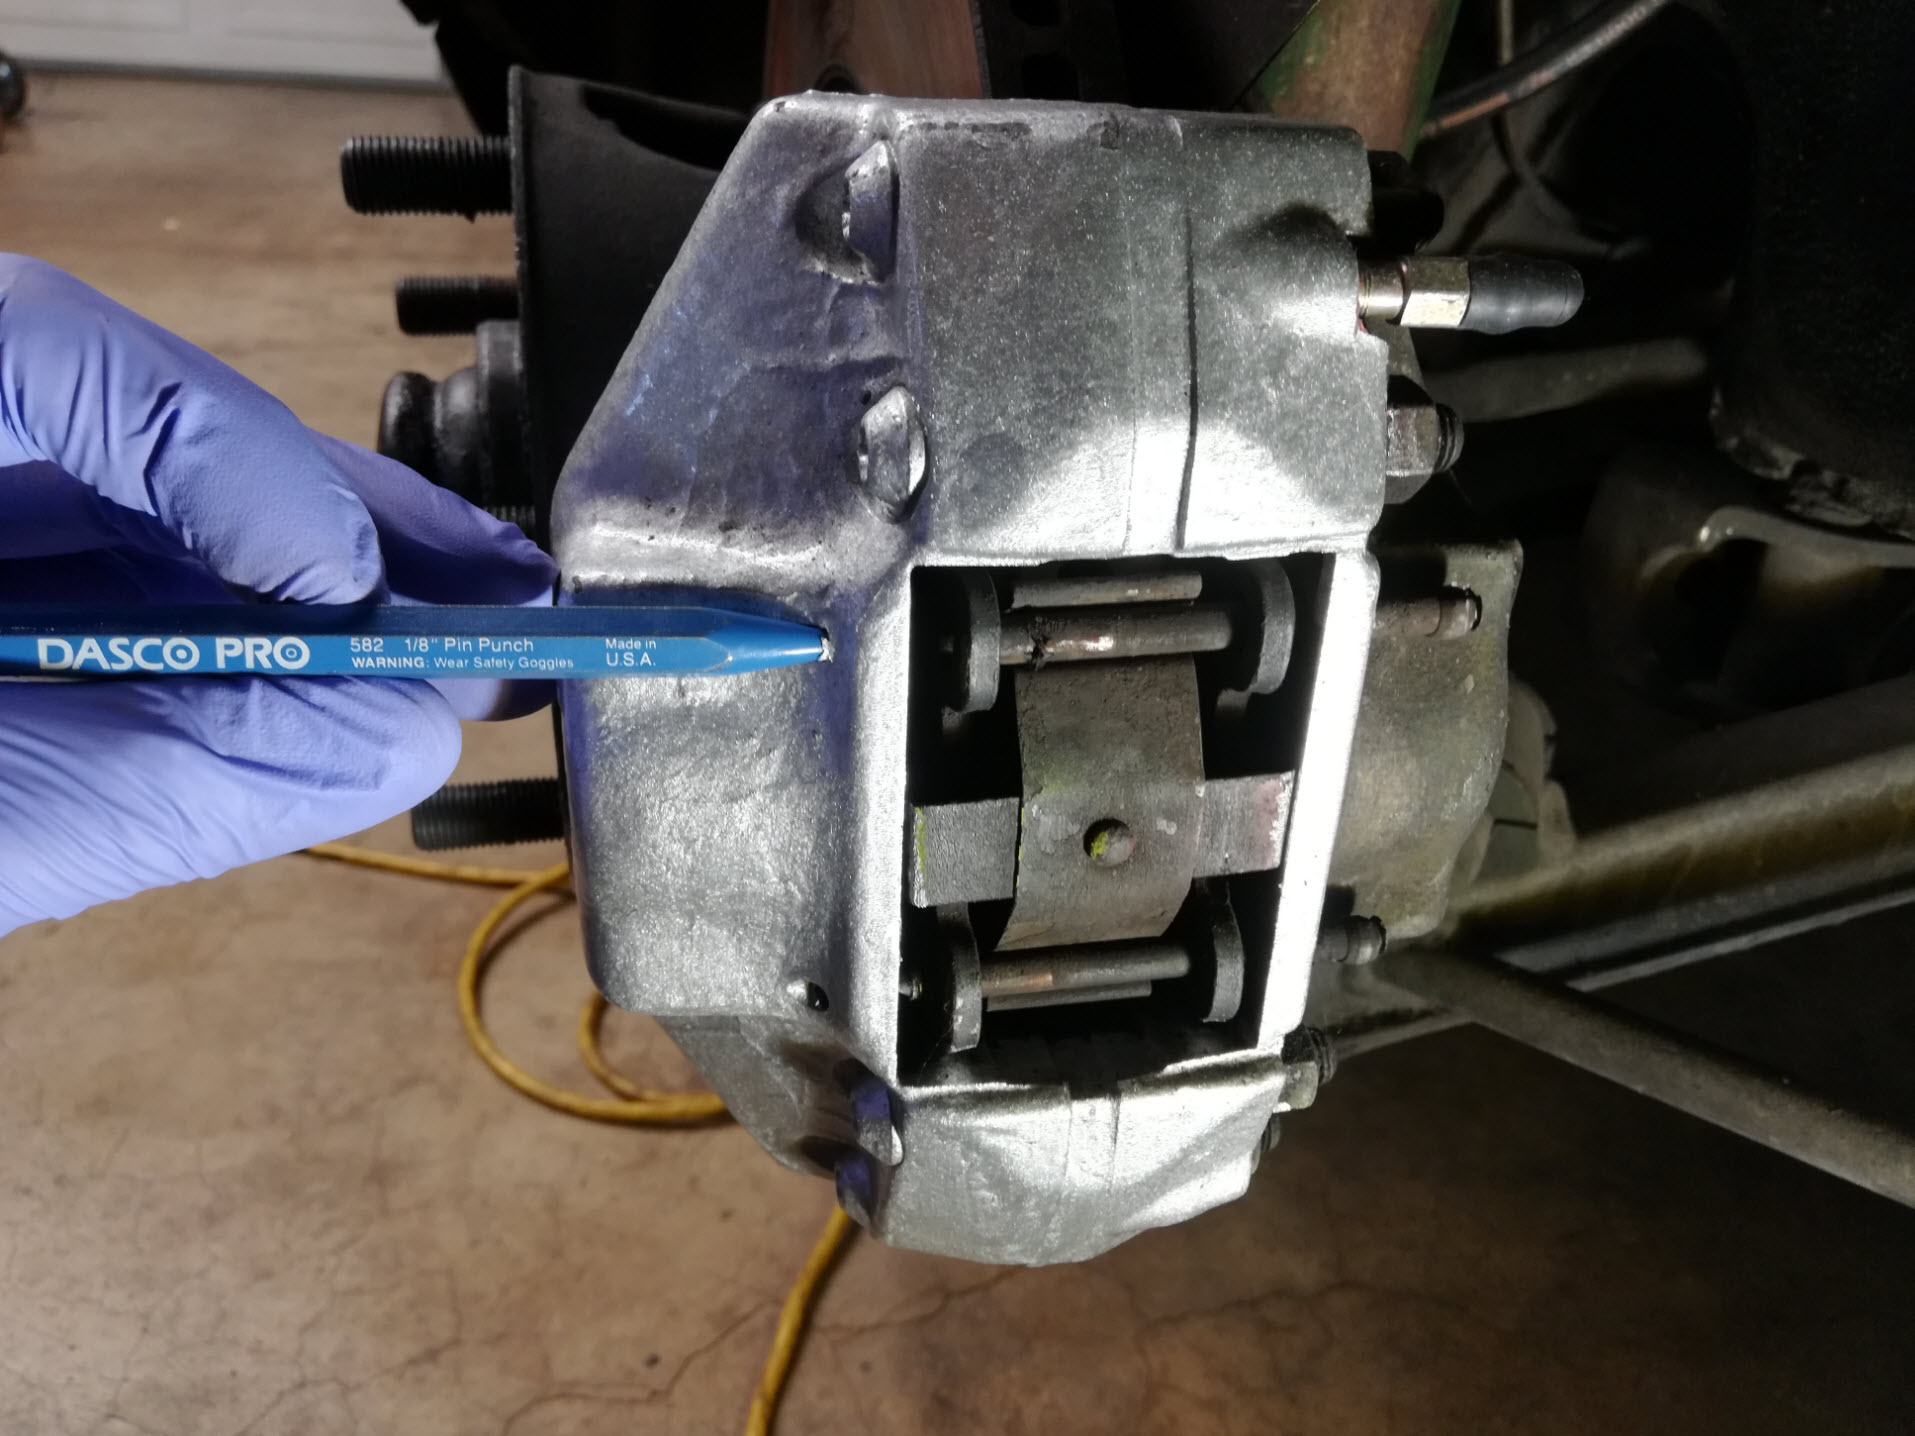 Air-cooled Porsche 911 brake pad retaining pin removal.